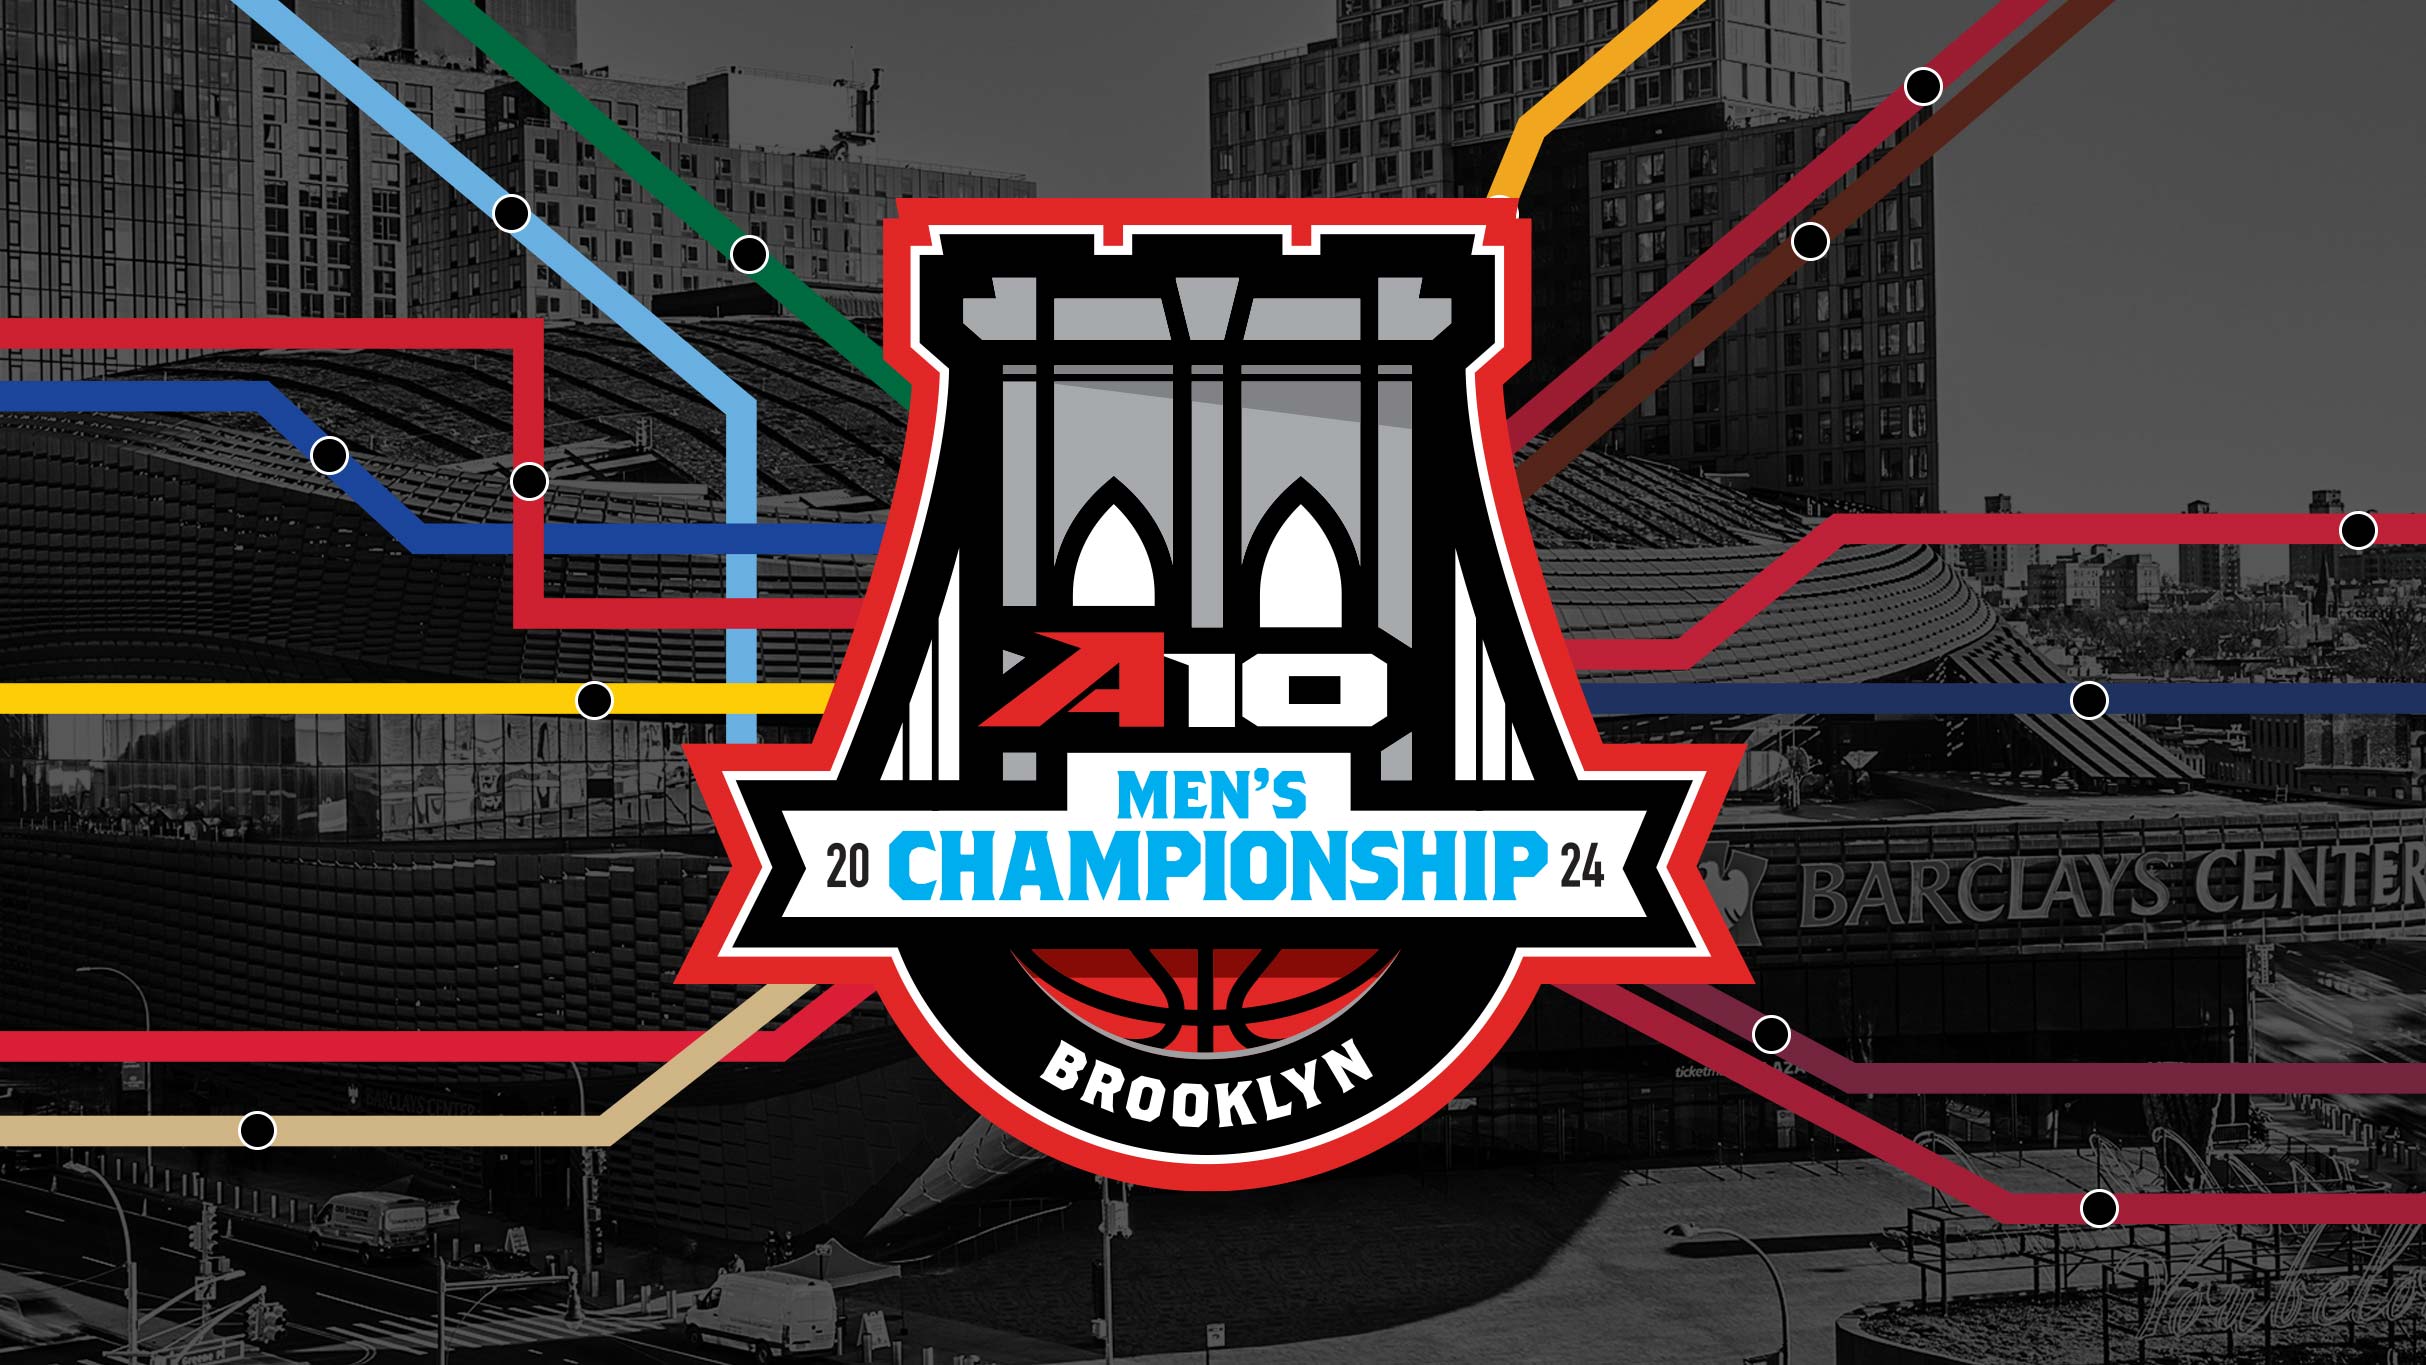 Atlantic 10 Men's Basketball Championship - Session 1 in Brooklyn promo photo for American Express® Early Access presale offer code